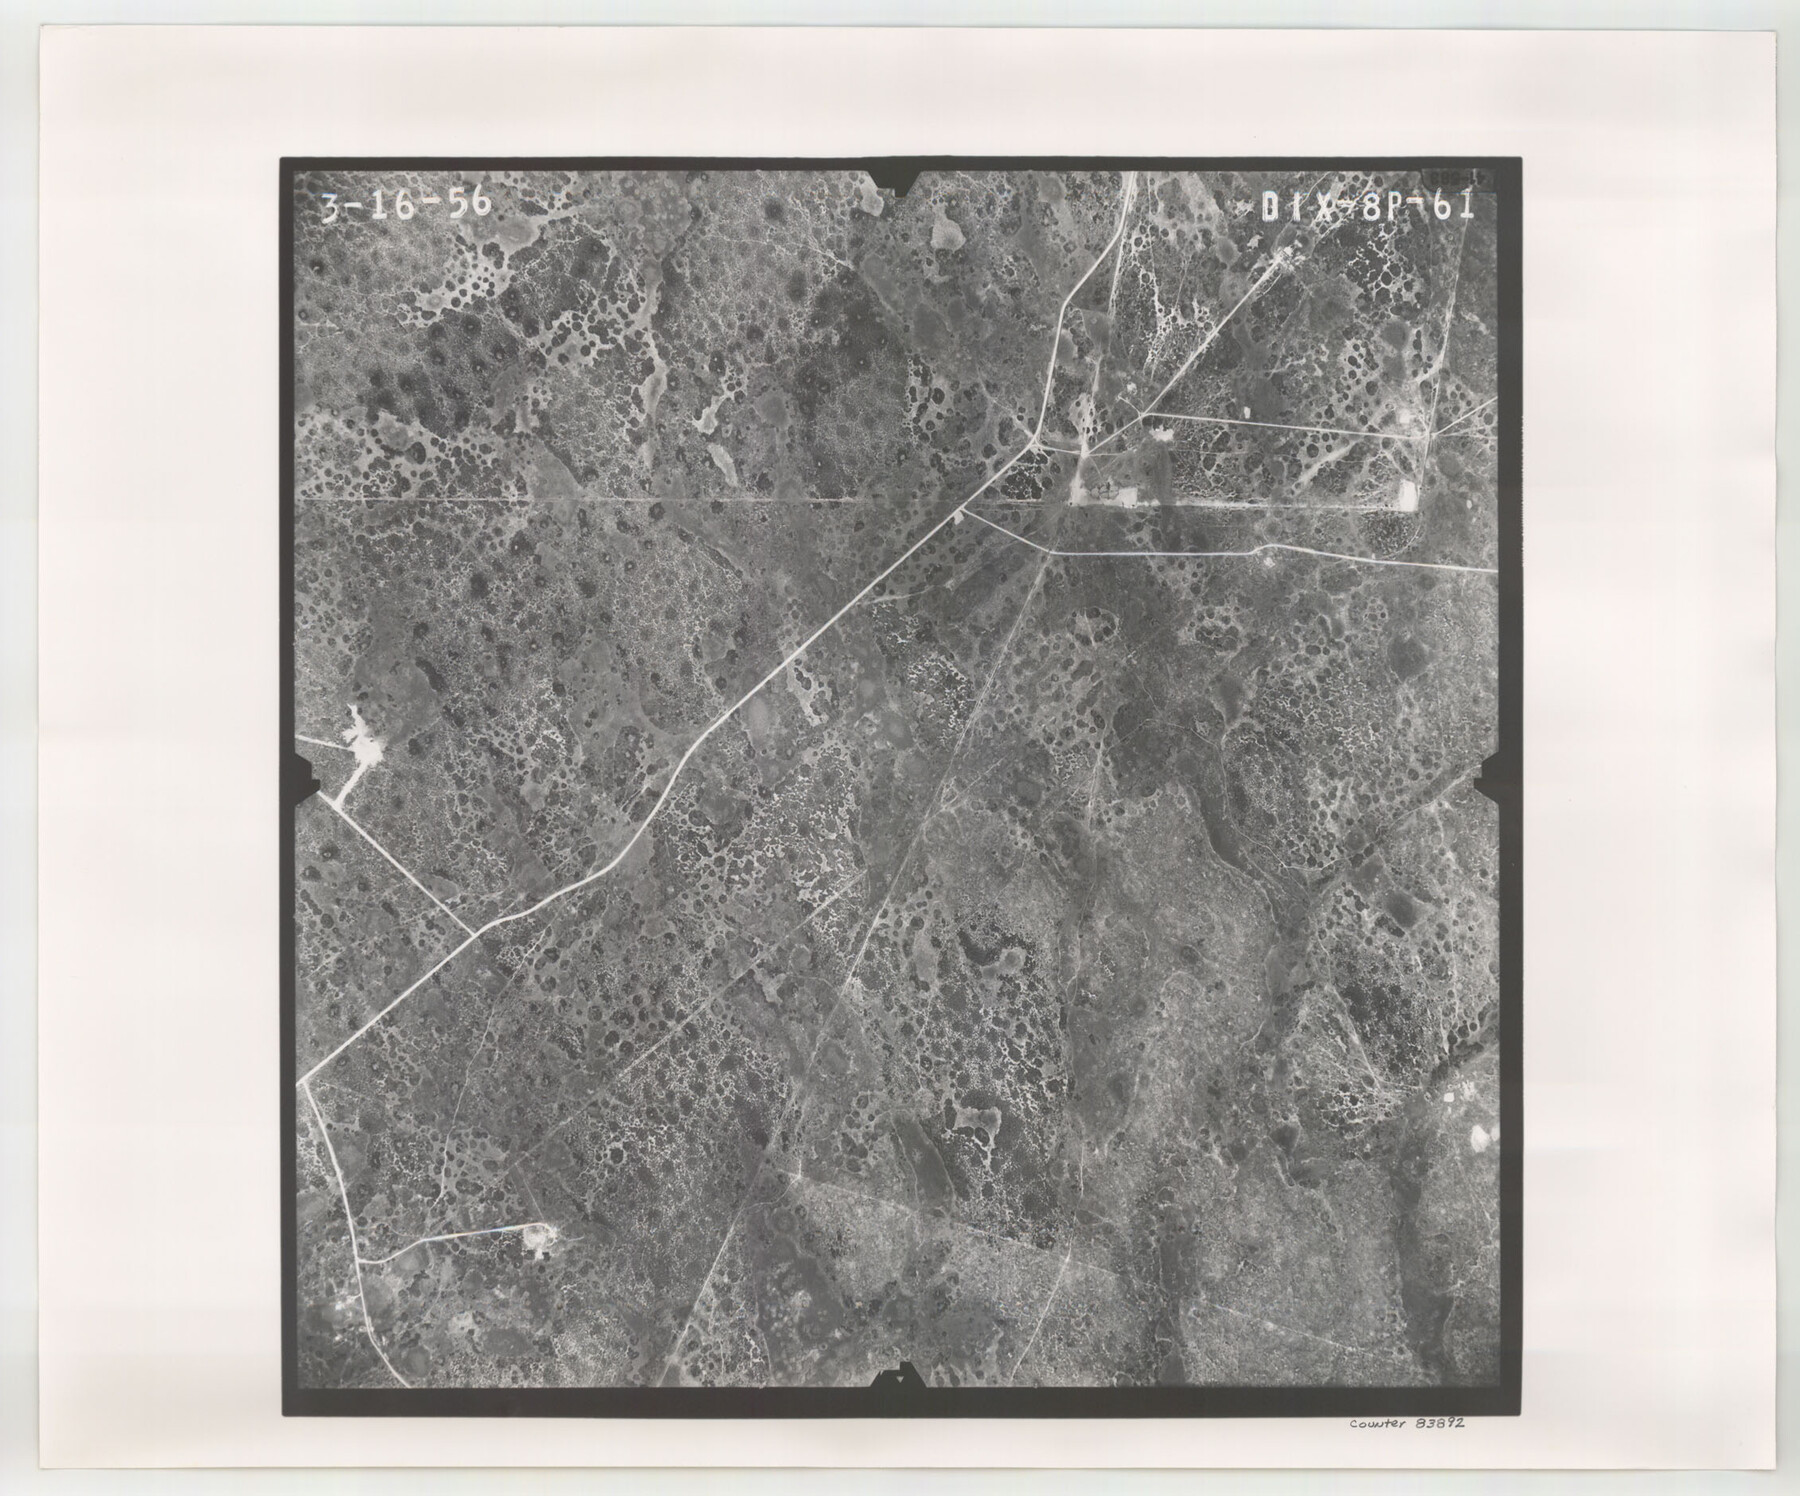 83892, Flight Mission No. DIX-8P, Frame 61, Aransas County, General Map Collection